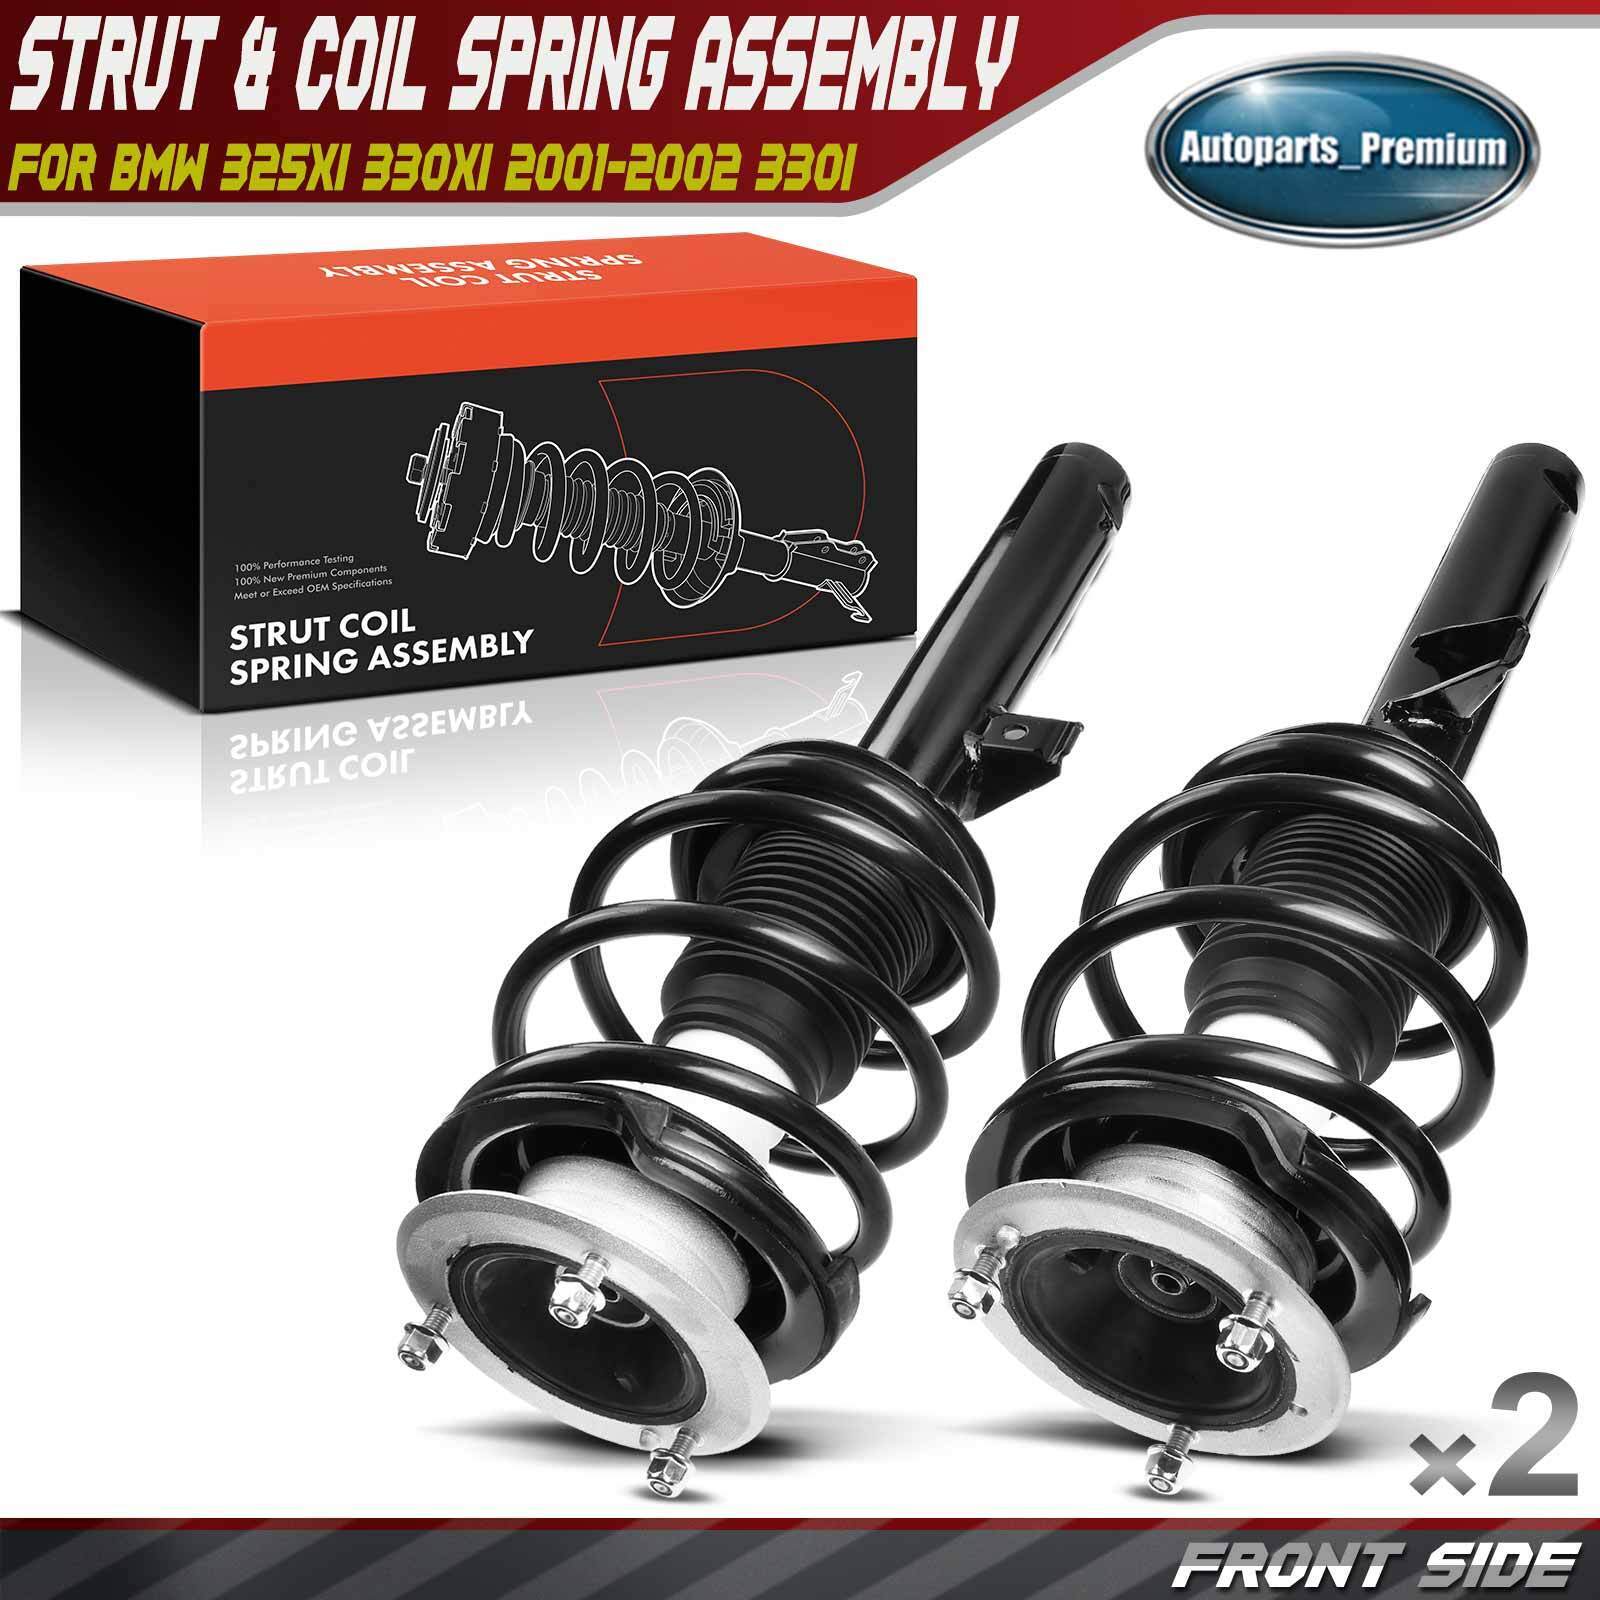 2x Front Strut & Coil Spring Assembly for BMW E46 325xi 330xi 2001-2002 4WD/AWD